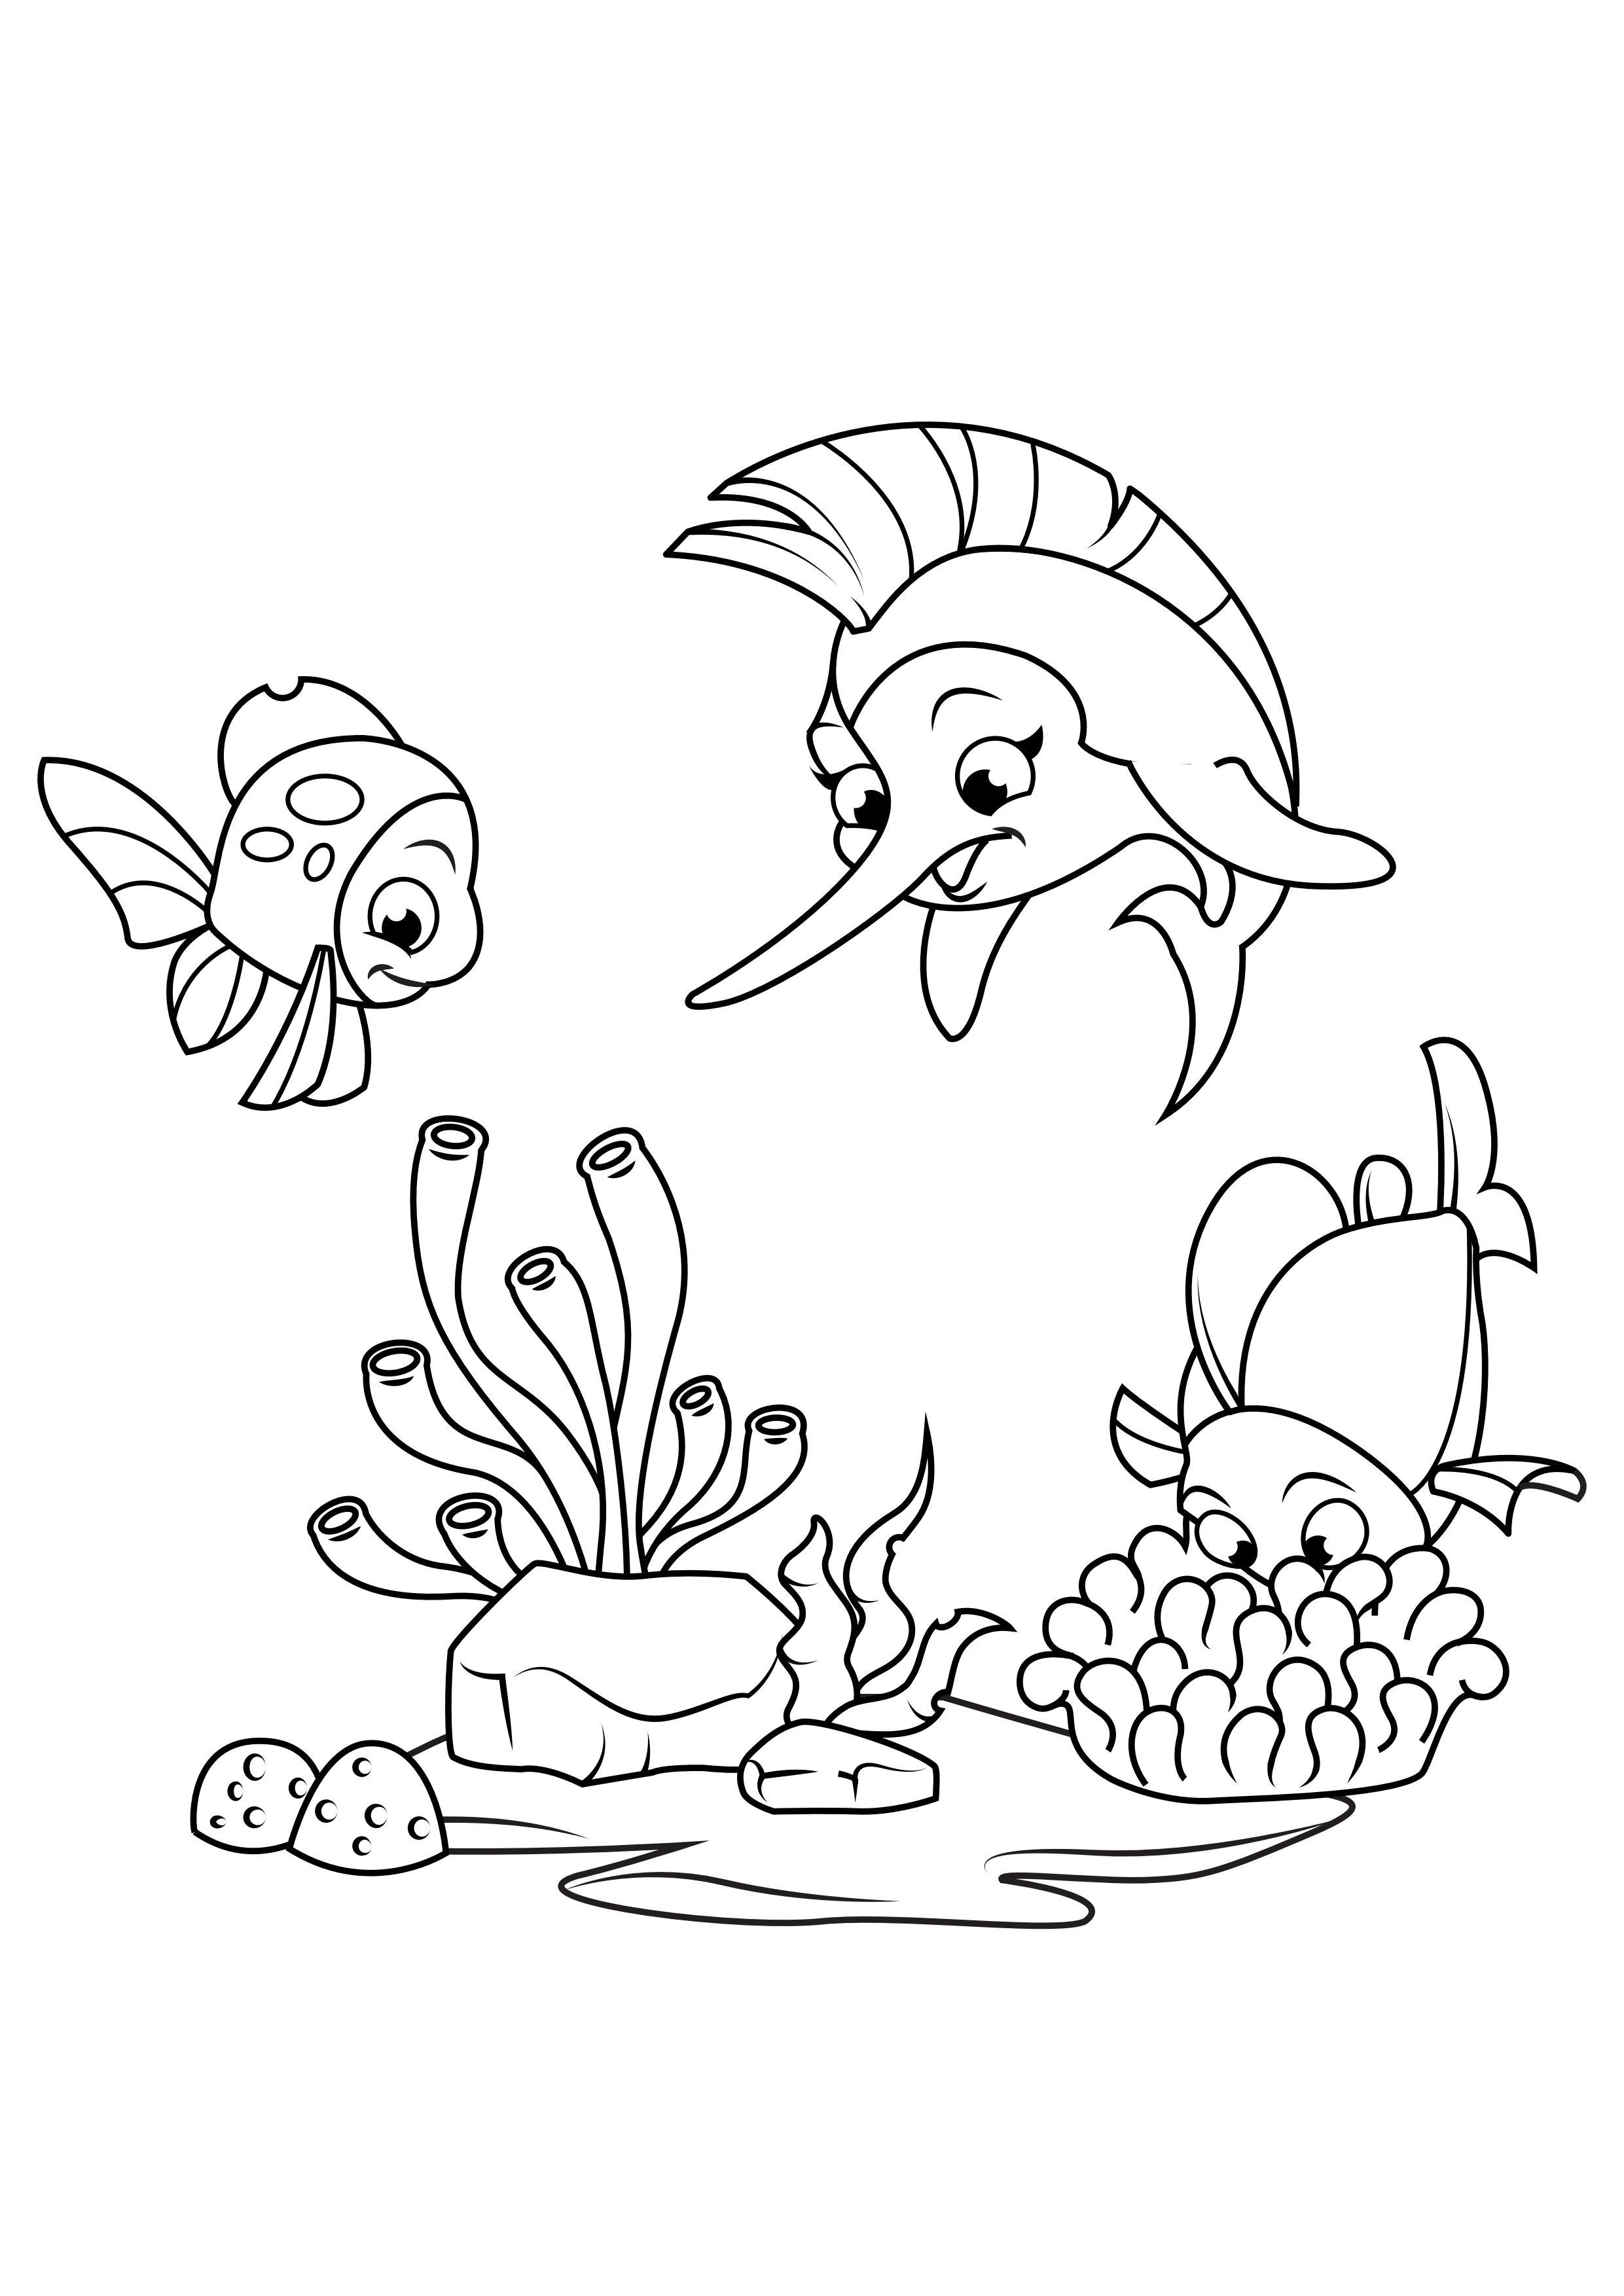 Coloring page swordfish plays with fish